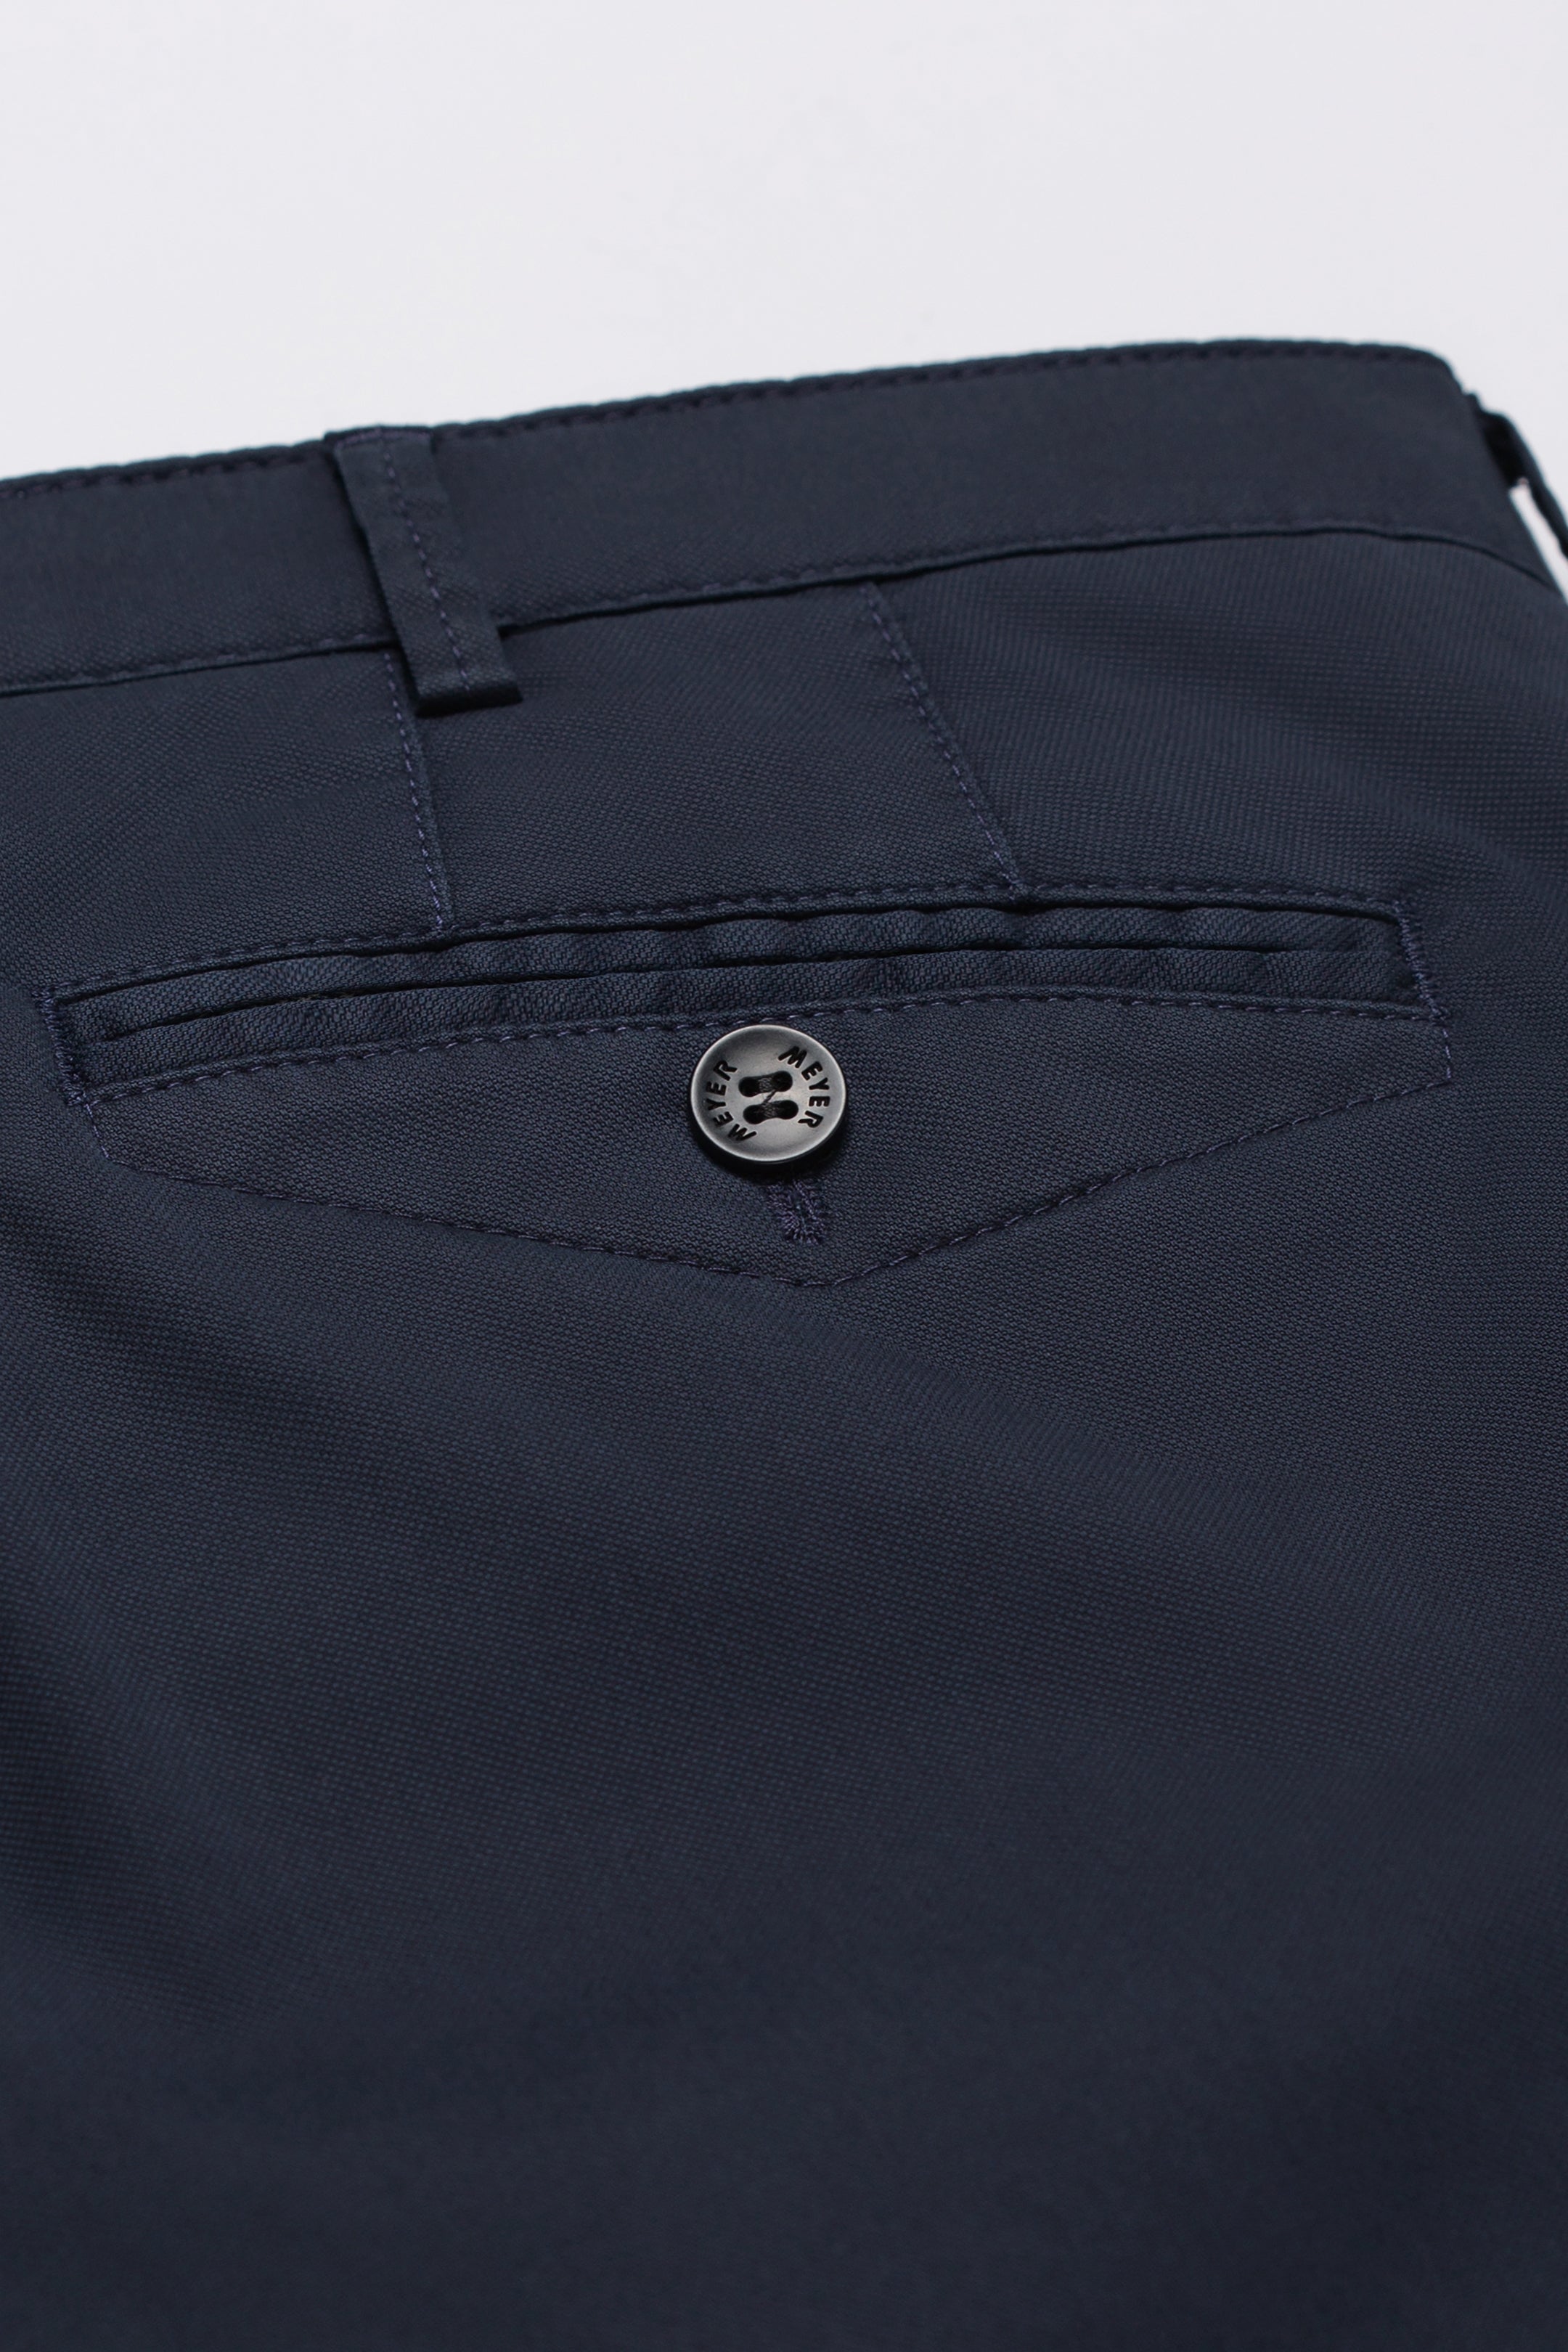 MEYER Trousers - Chicago 5060 Lightweight Cotton Chinos - Navy